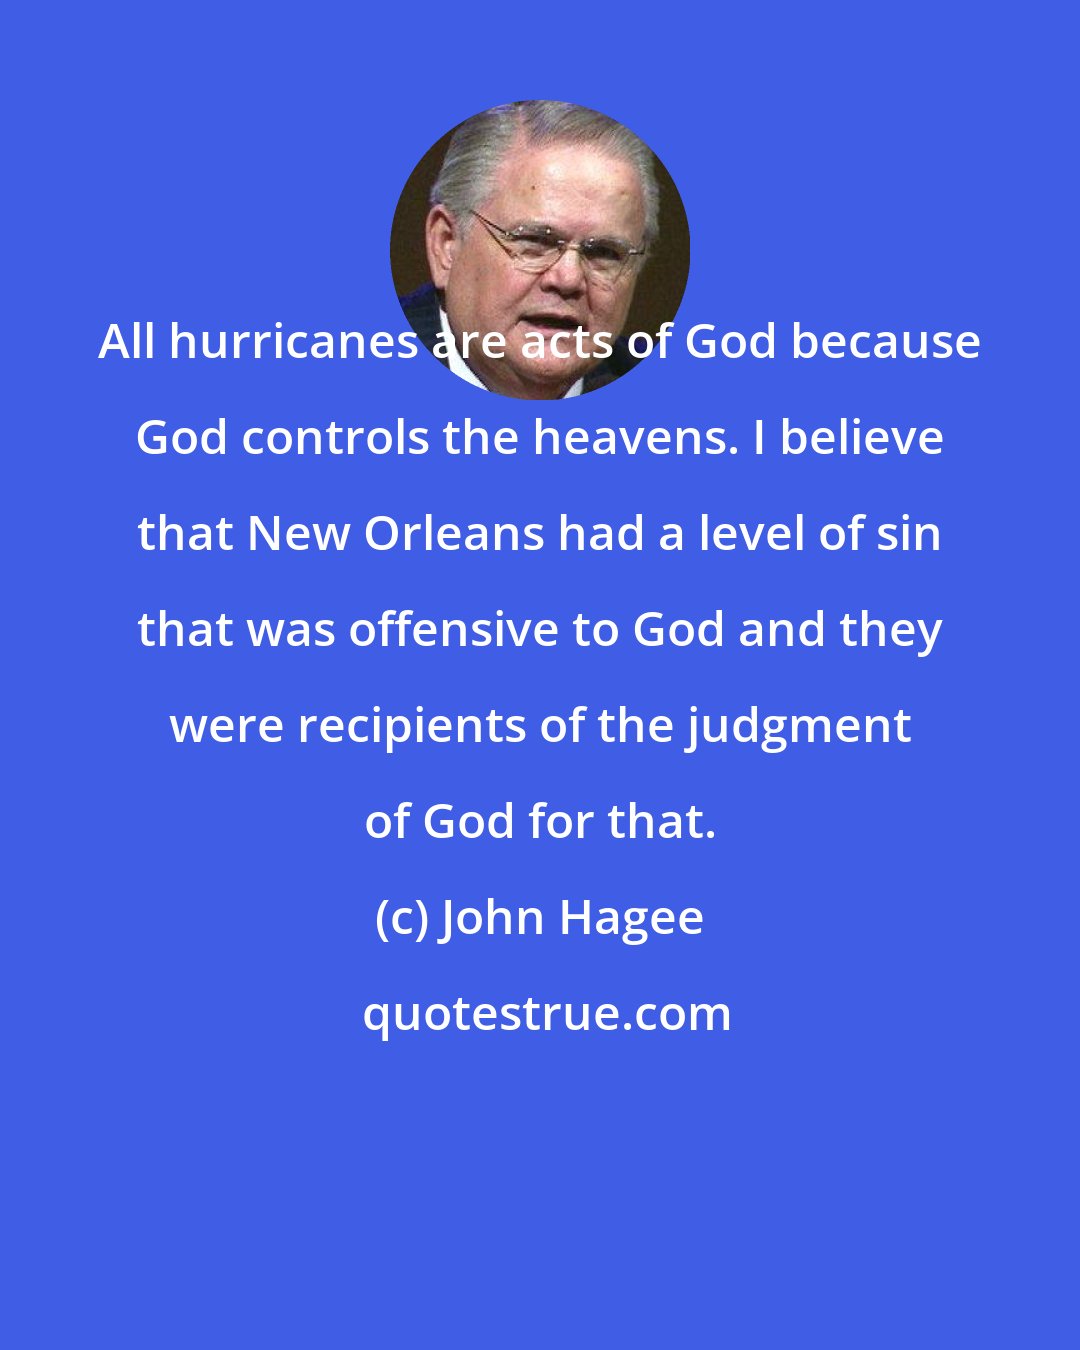 John Hagee: All hurricanes are acts of God because God controls the heavens. I believe that New Orleans had a level of sin that was offensive to God and they were recipients of the judgment of God for that.